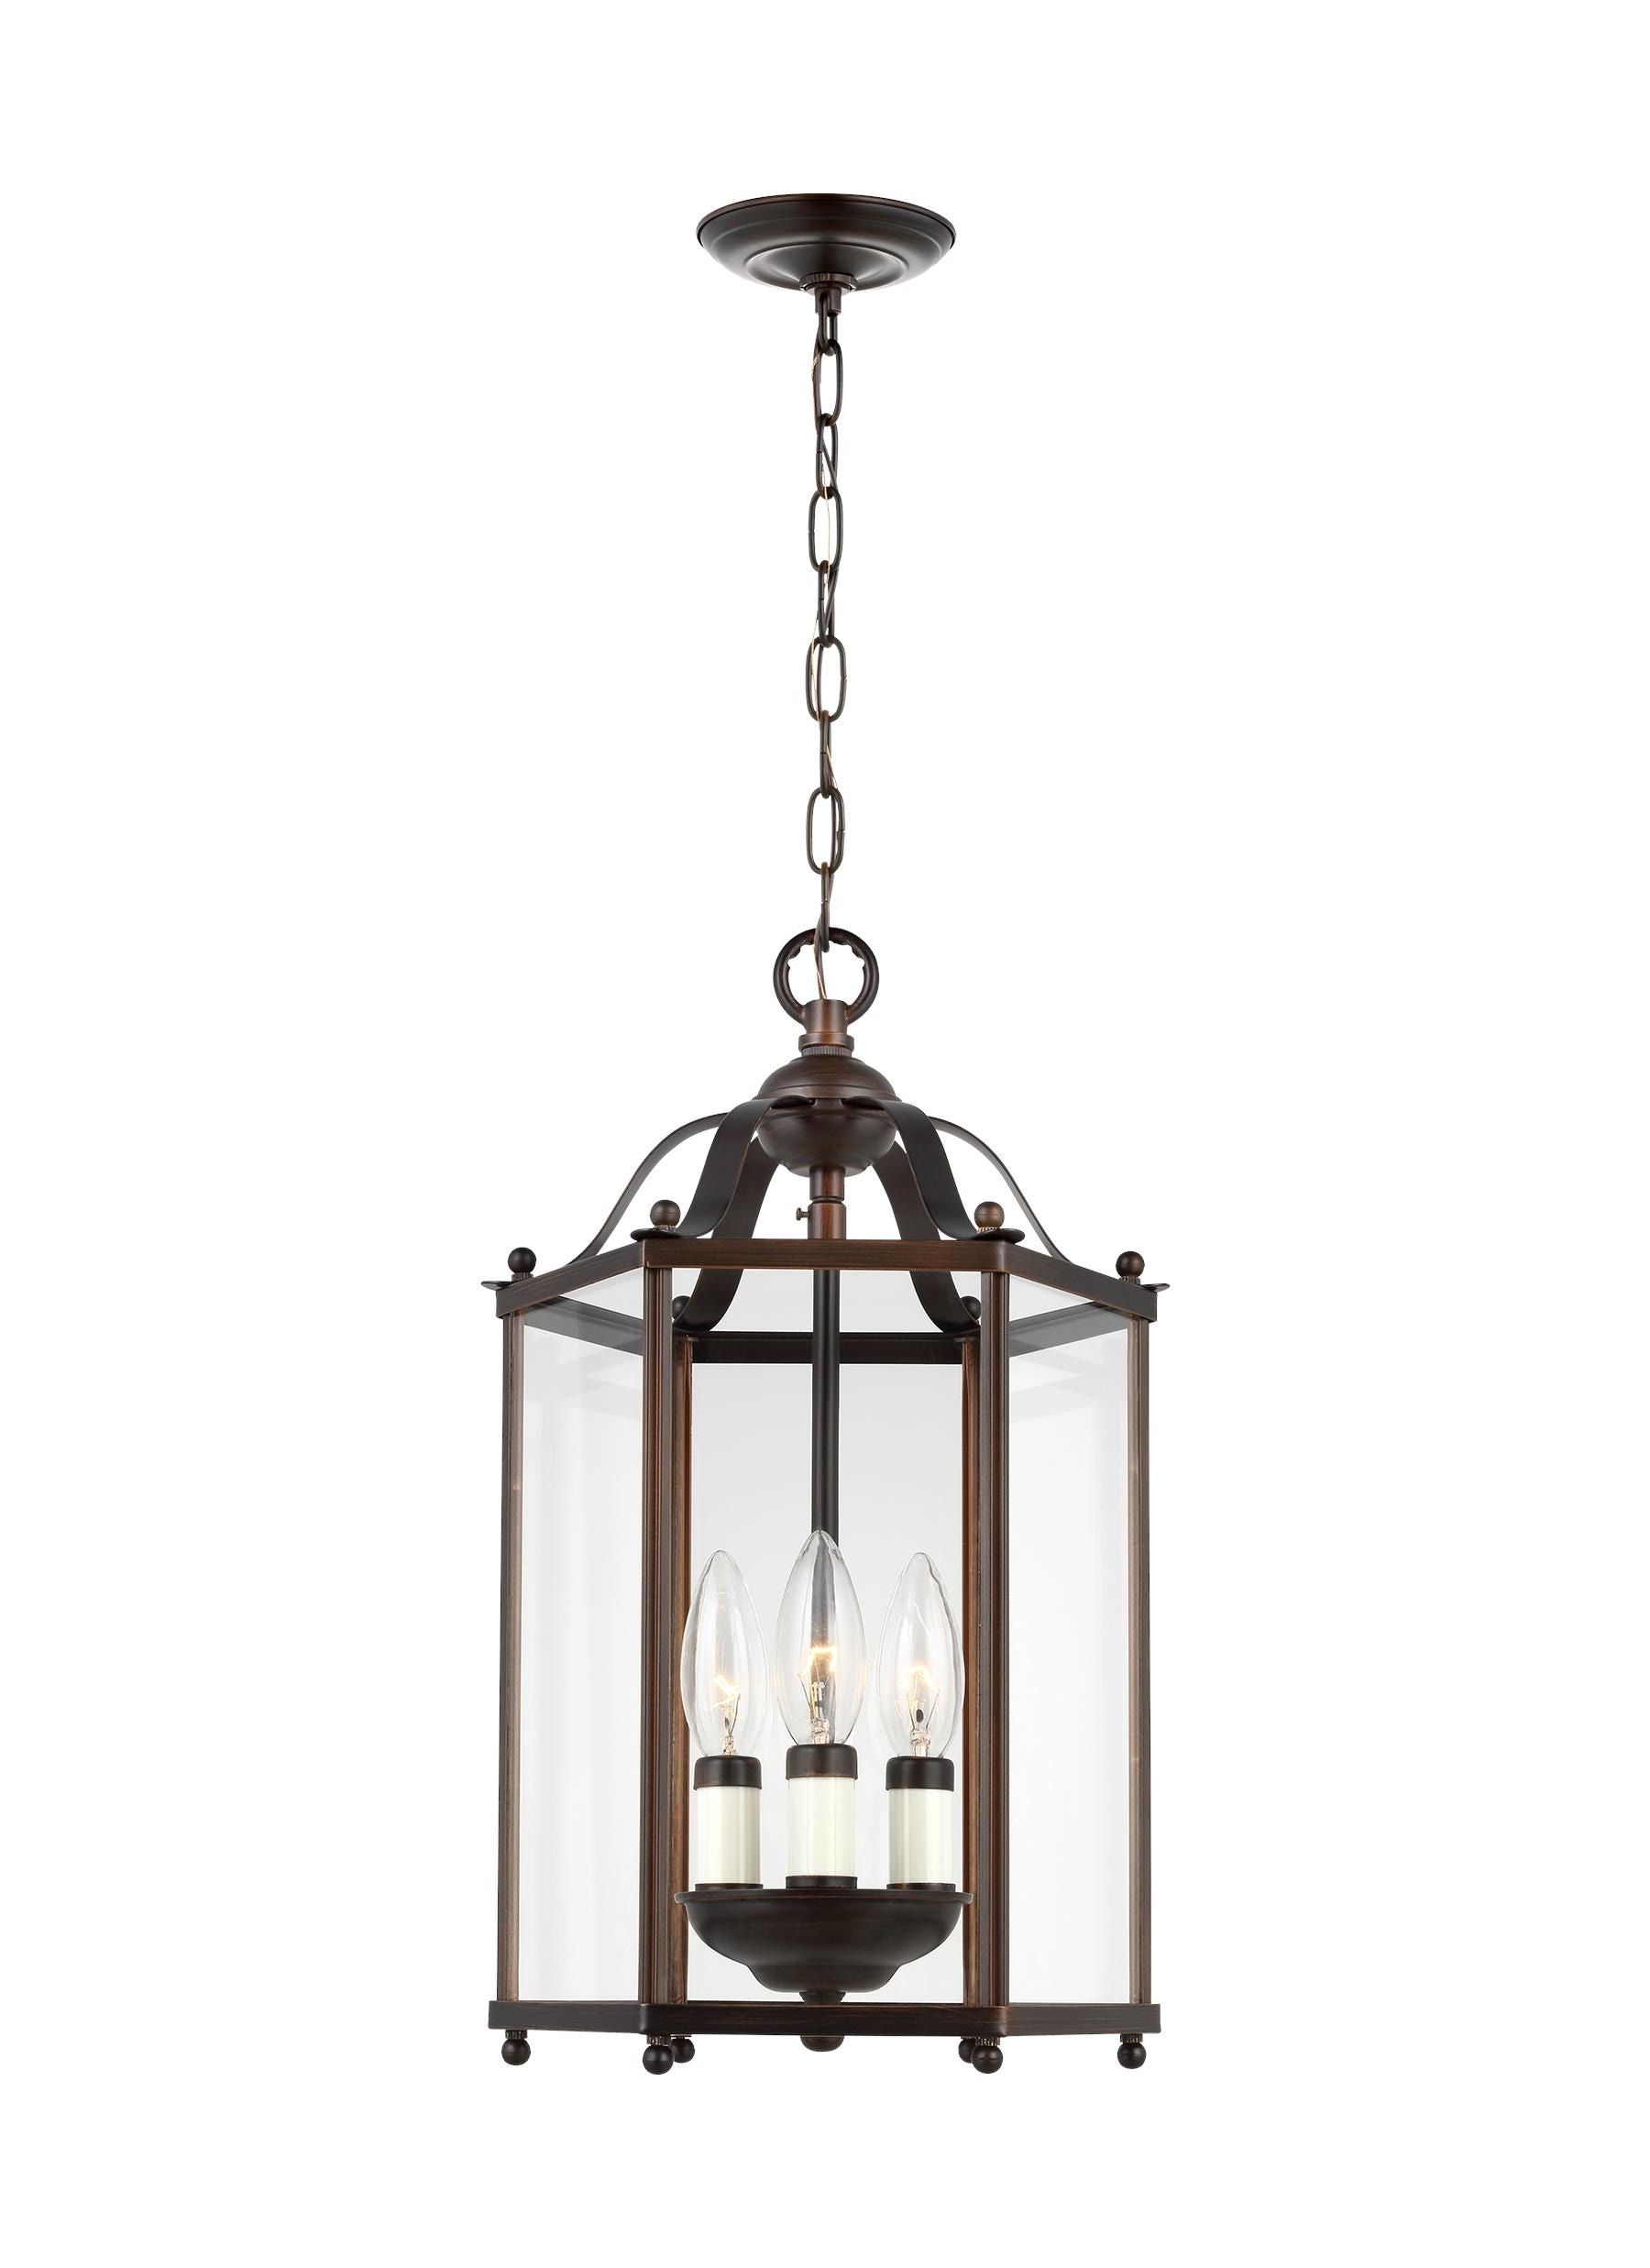 Lantern Chandeliers With Transparent Glass Regarding Well Known Sea Gull Lighting Bretton 2 Light Bronze Traditional Clear Glass Lantern  Pendant Light In The Pendant Lighting Department At Lowes (View 10 of 15)